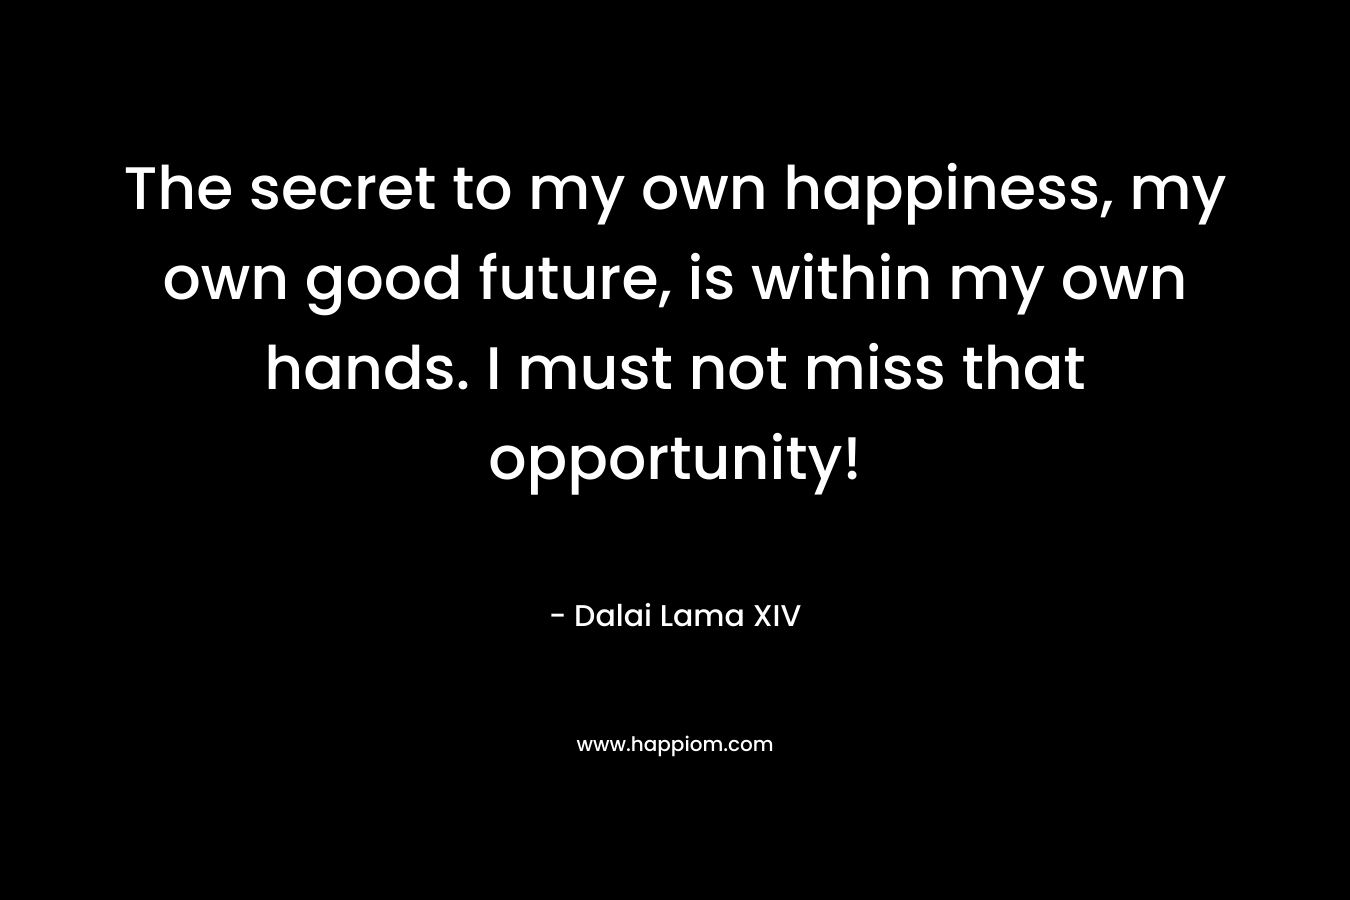 The secret to my own happiness, my own good future, is within my own hands. I must not miss that opportunity! – Dalai Lama XIV